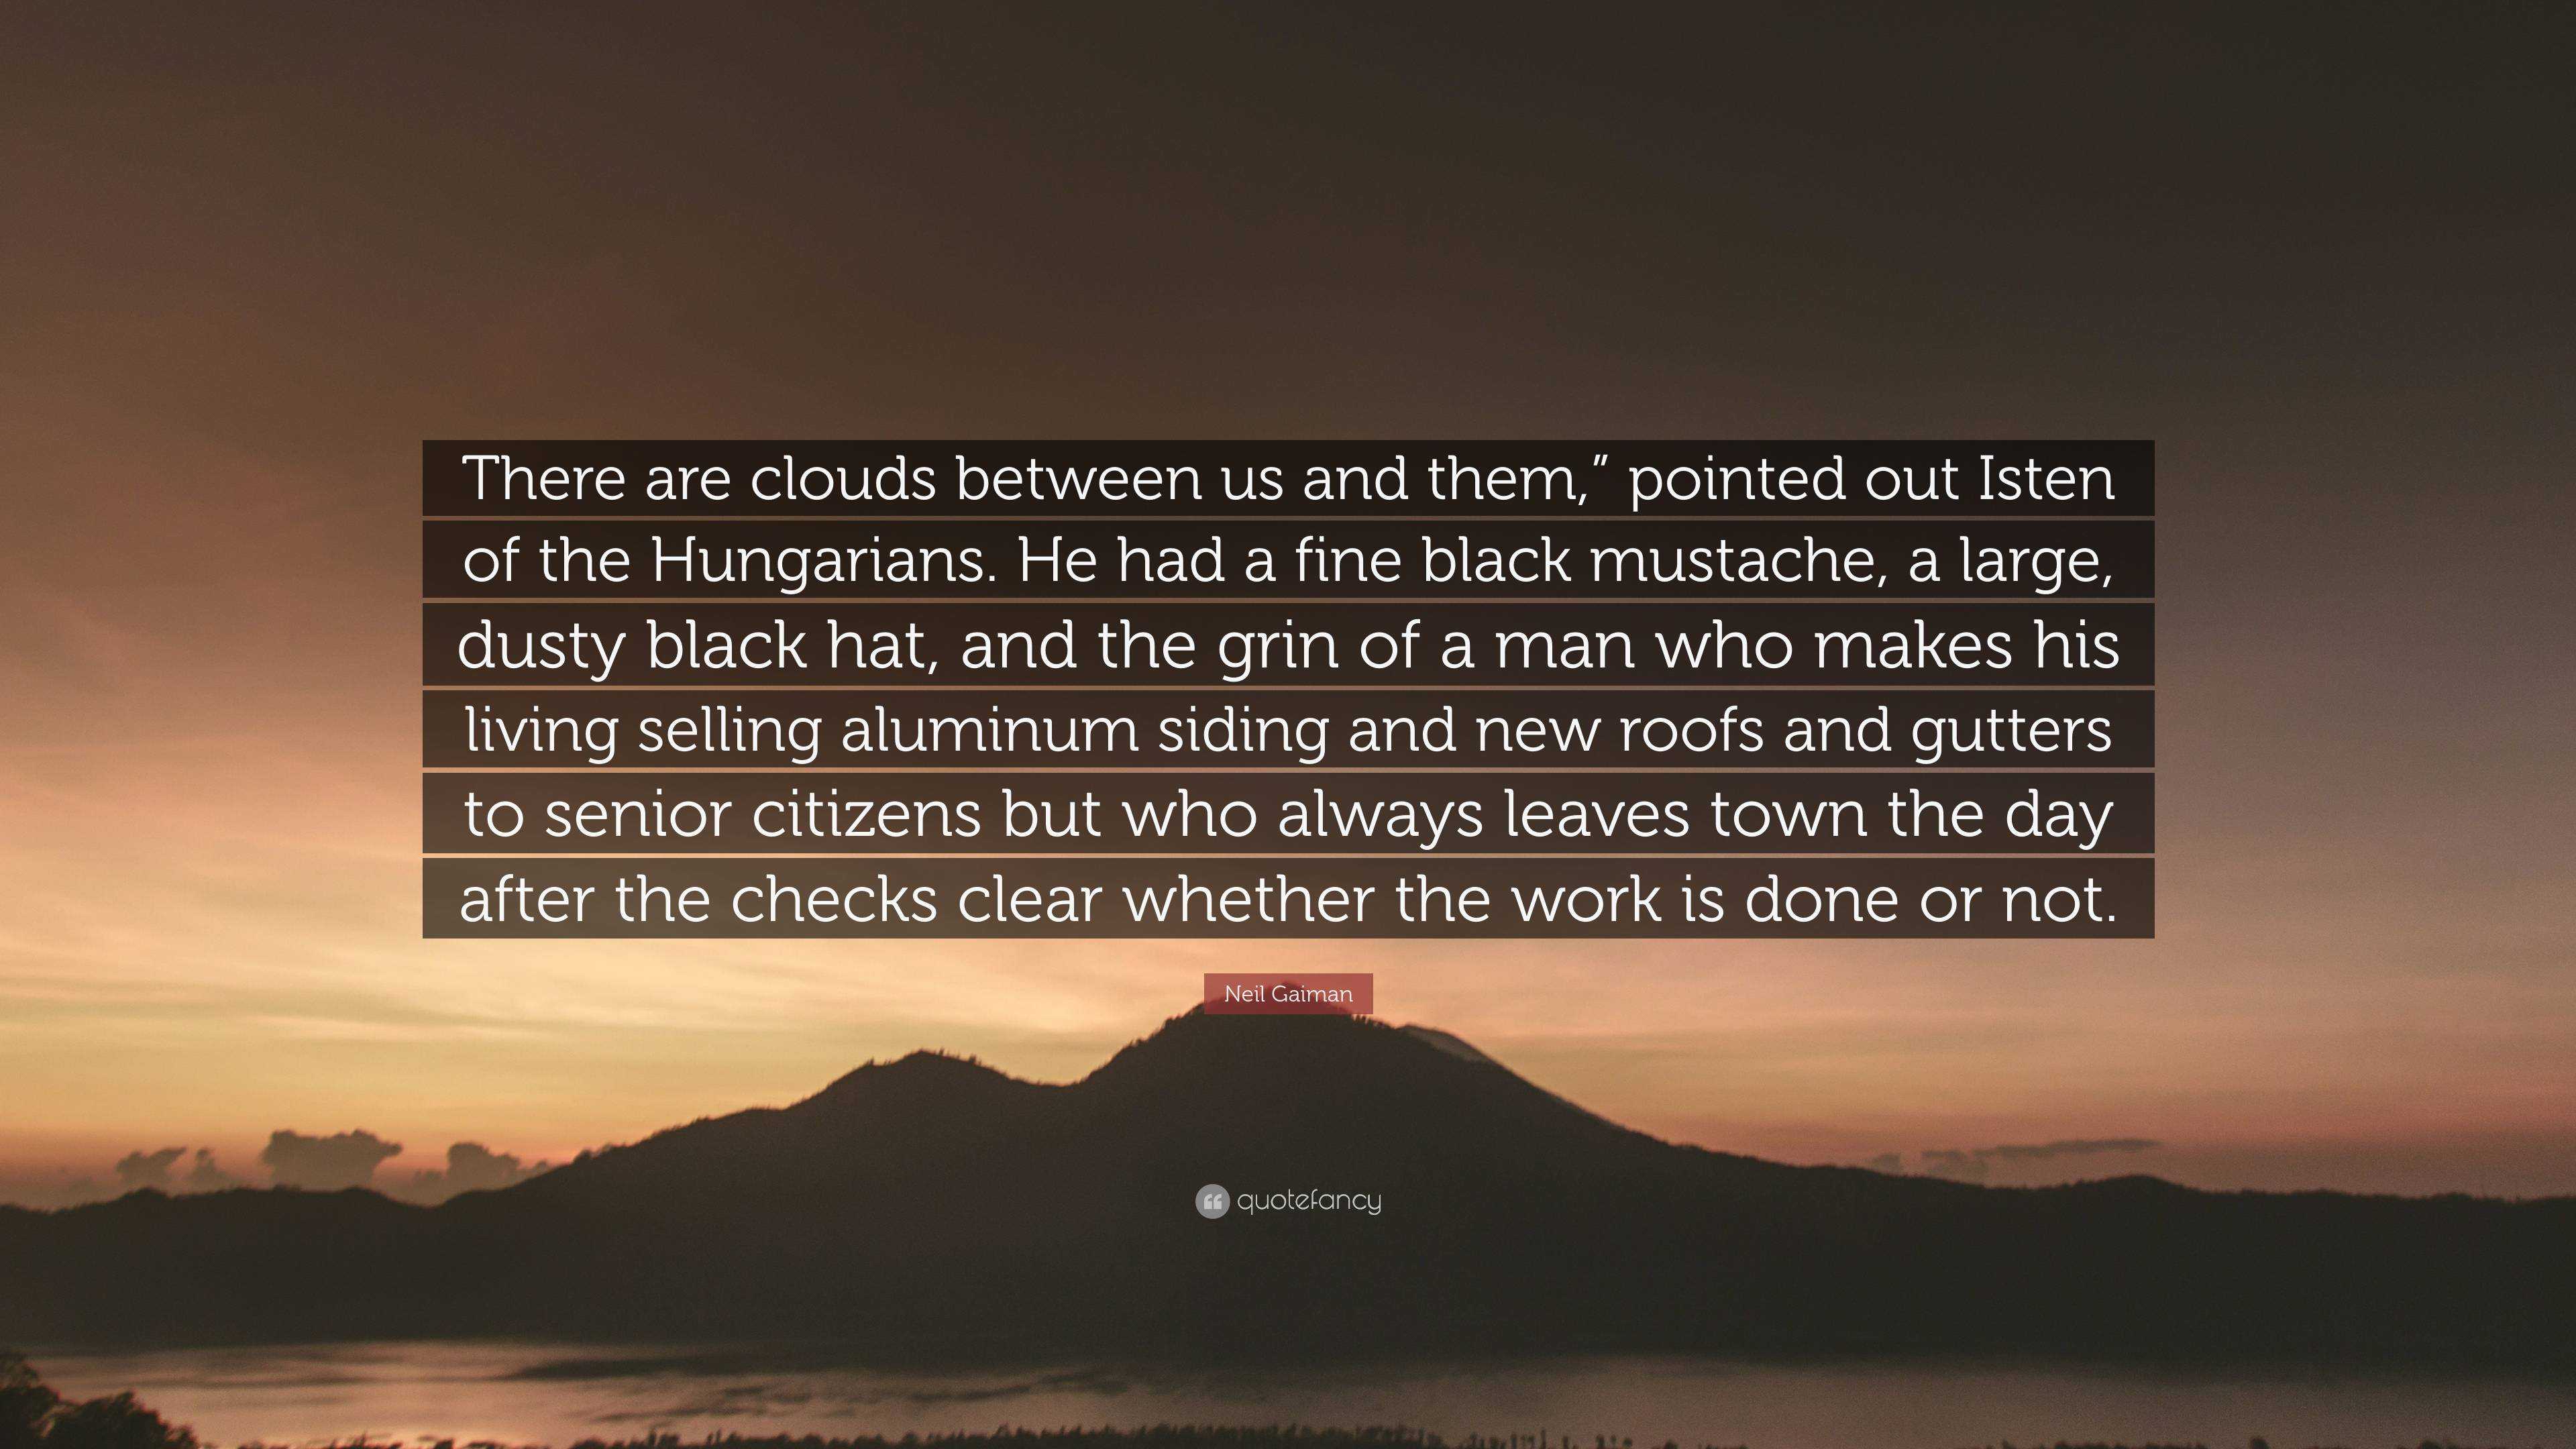 Neil Gaiman Quote: “There are clouds between us and them,” pointed out ...